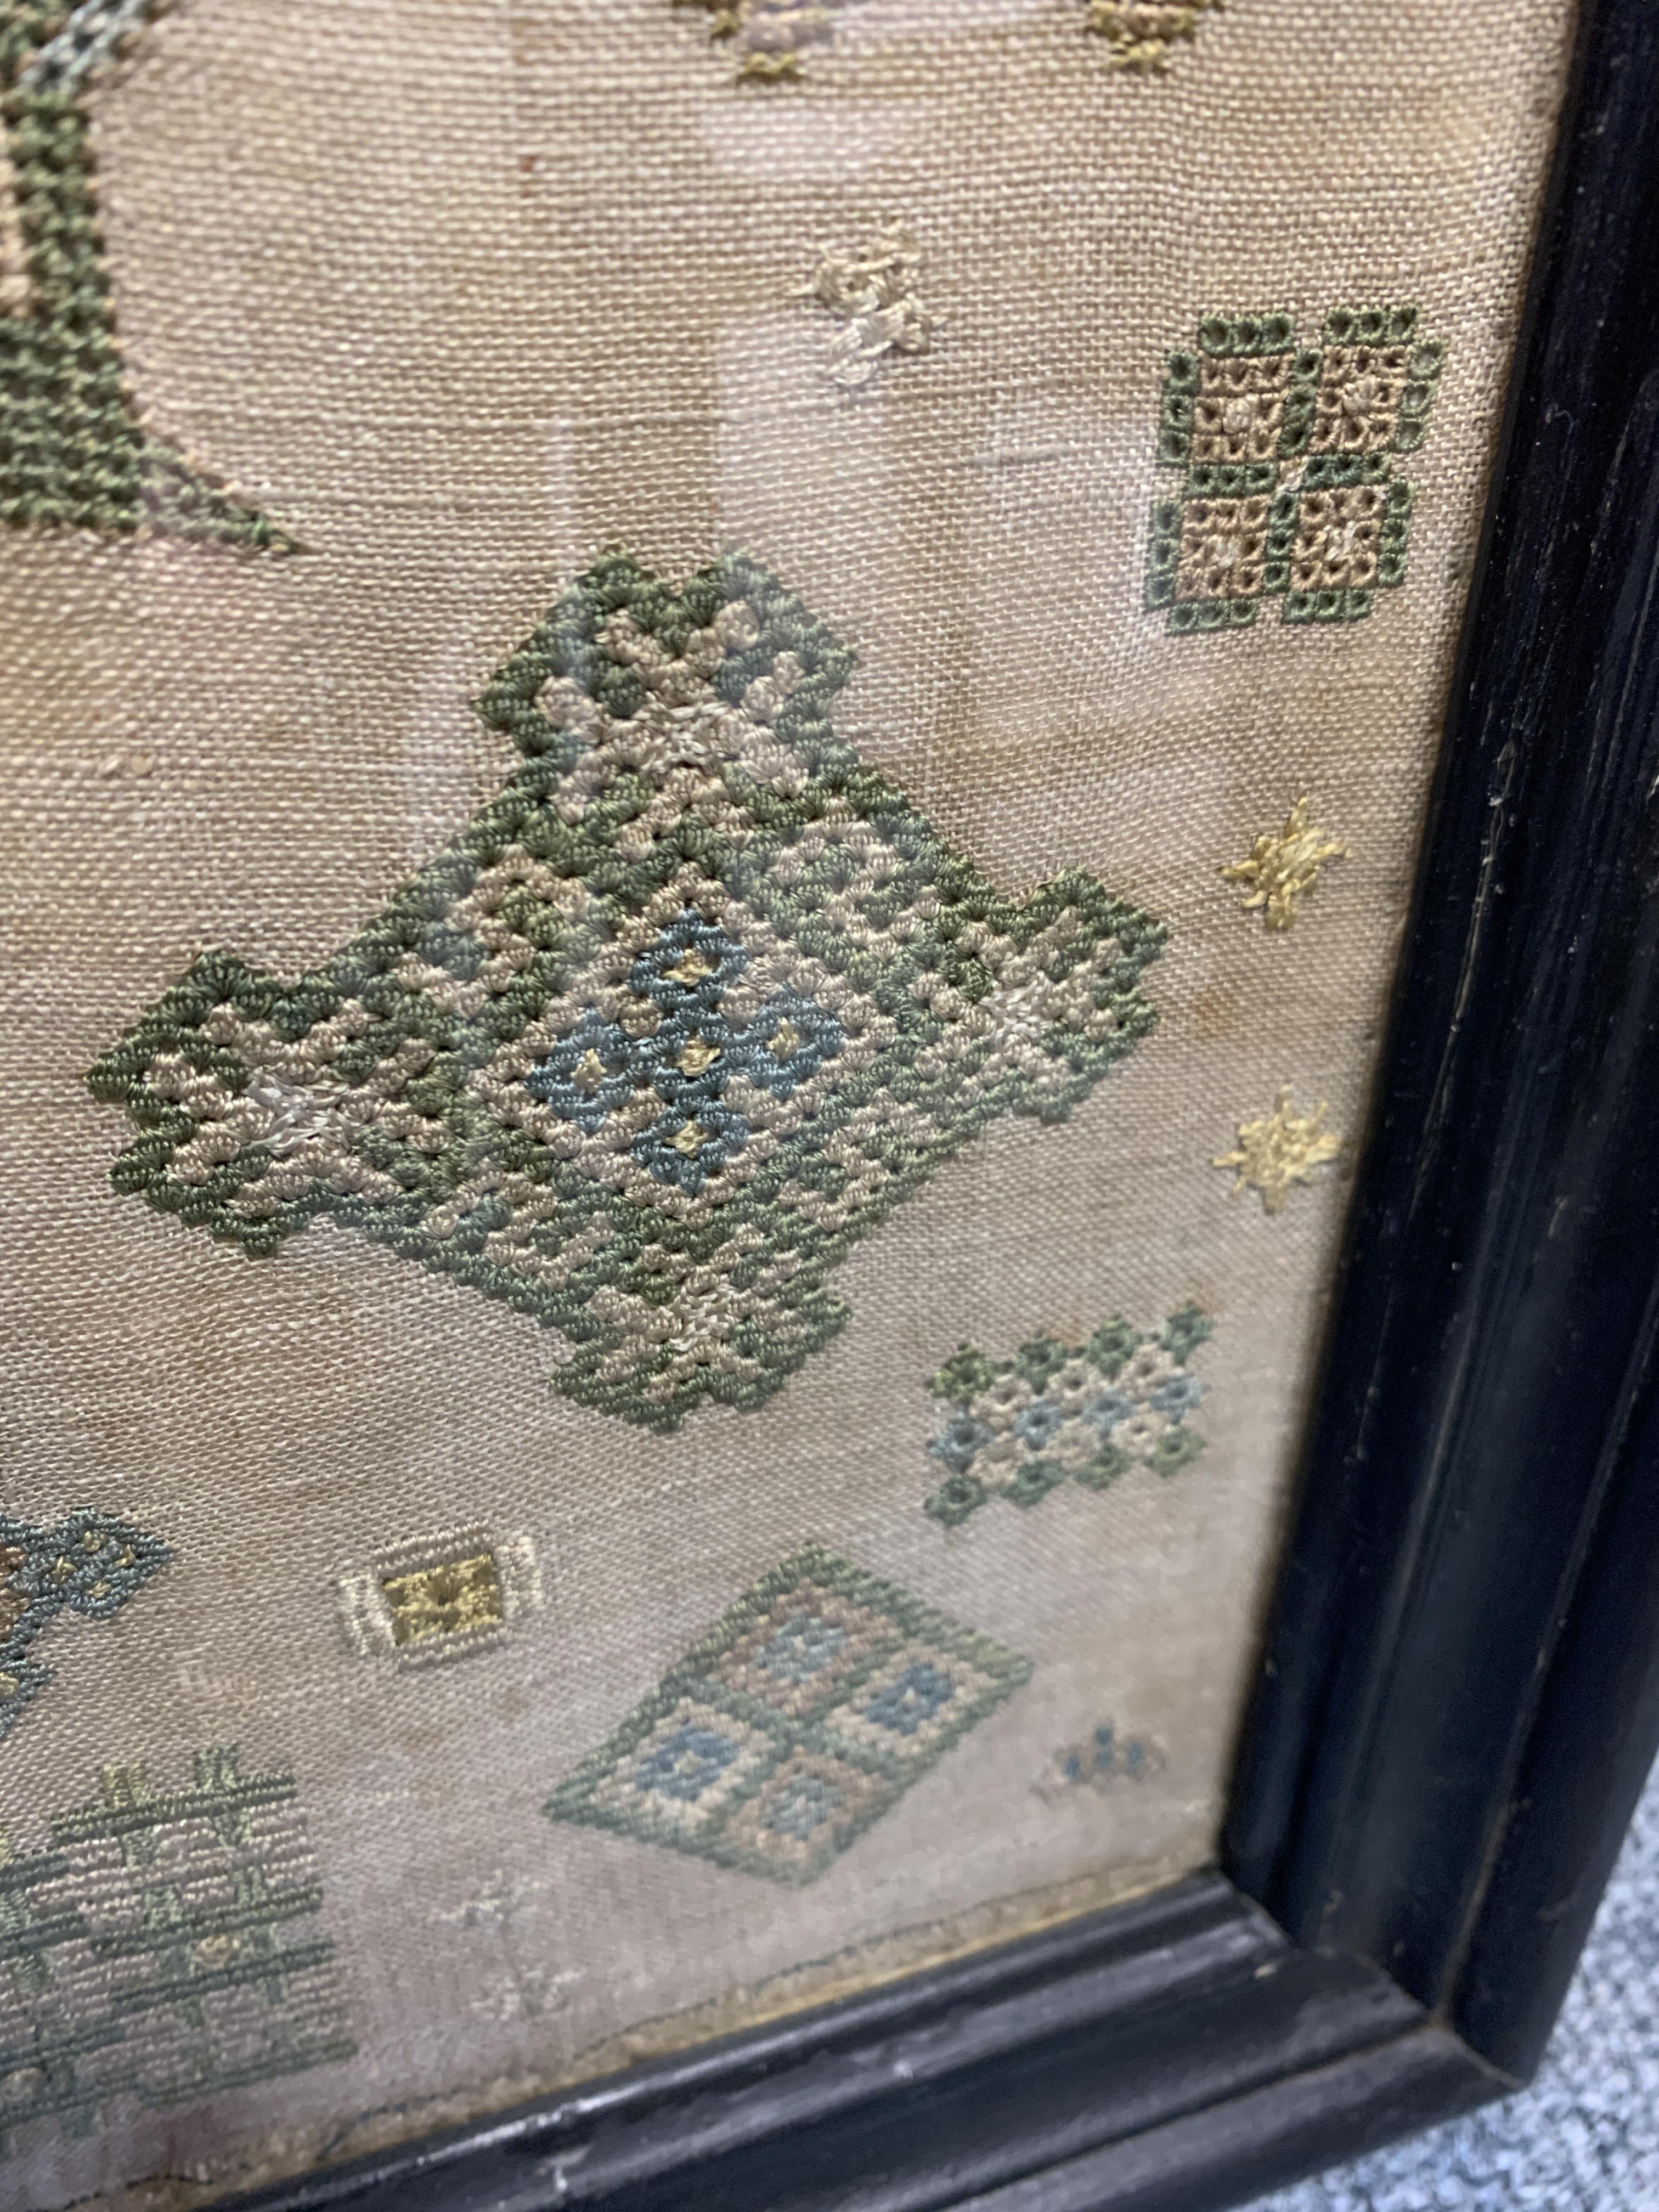 A RARE NEEDLEWORK SPOT SAMPLER BY GRACE THRUSTON, MID-17TH CENTURY worked with polychrome silks on - Image 11 of 15